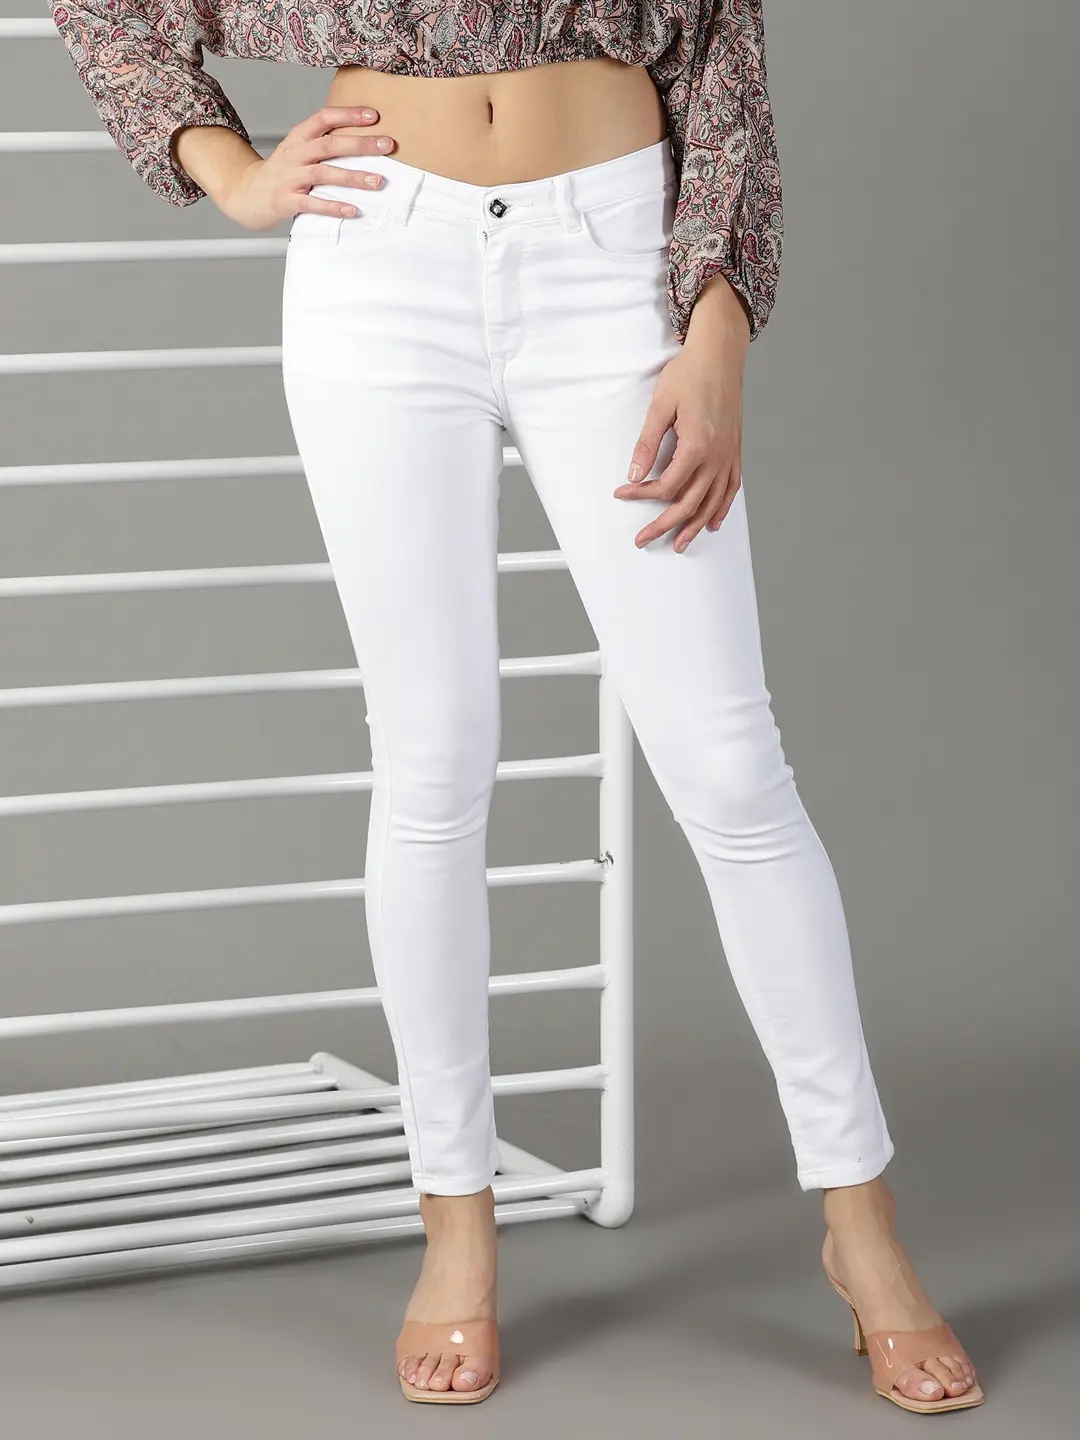 SHOWOFF Women's Stretchable Clean Look White Regular Fit Jeans